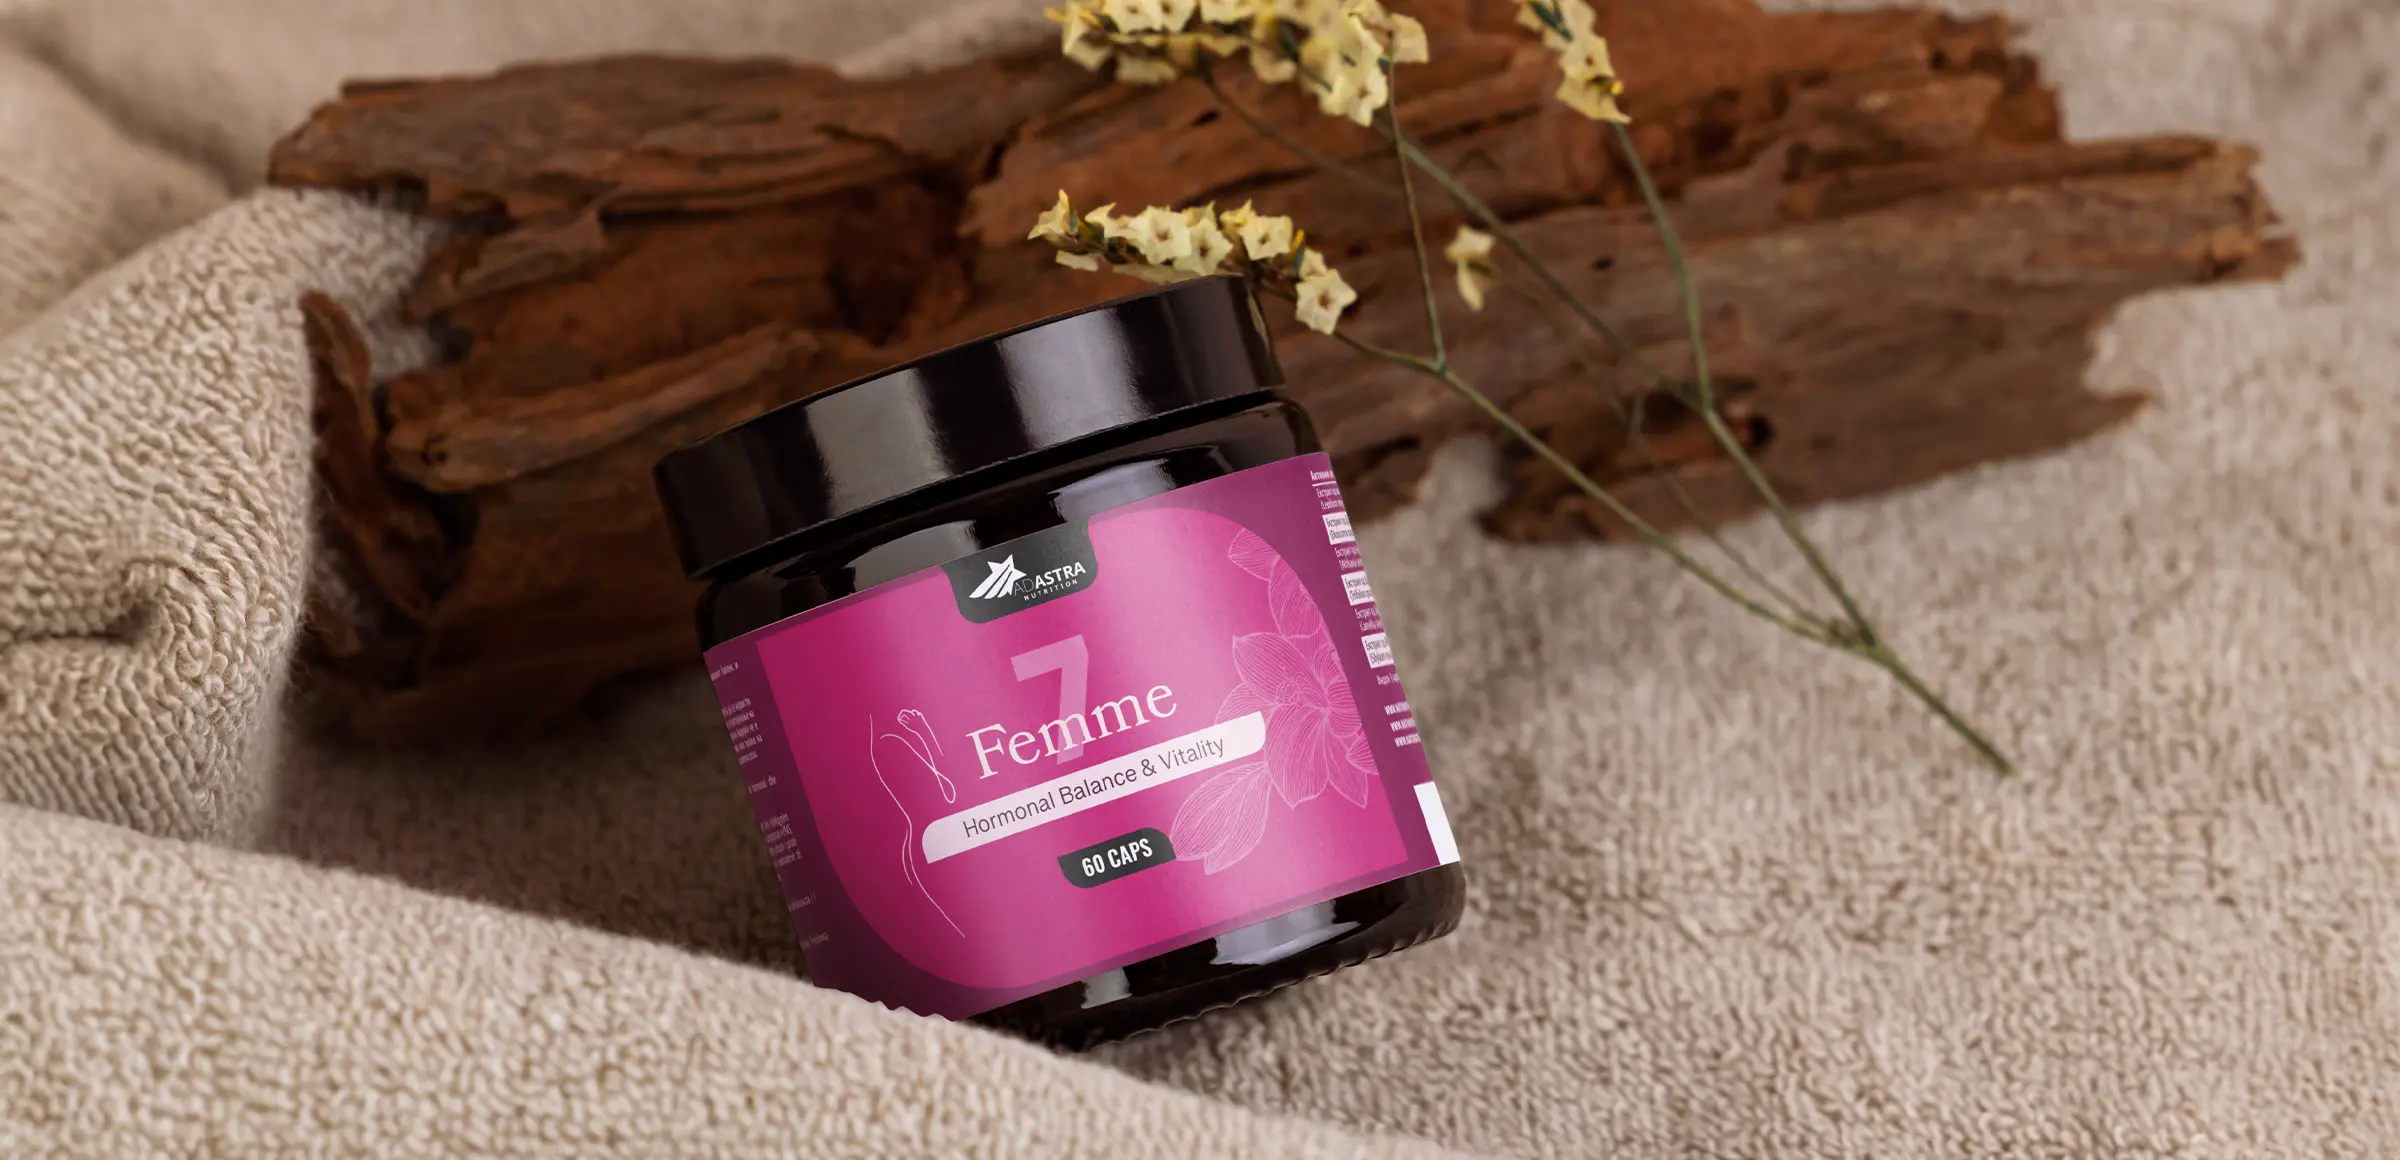 Packaging Label for Femme 7 in a jar, realistic mockup